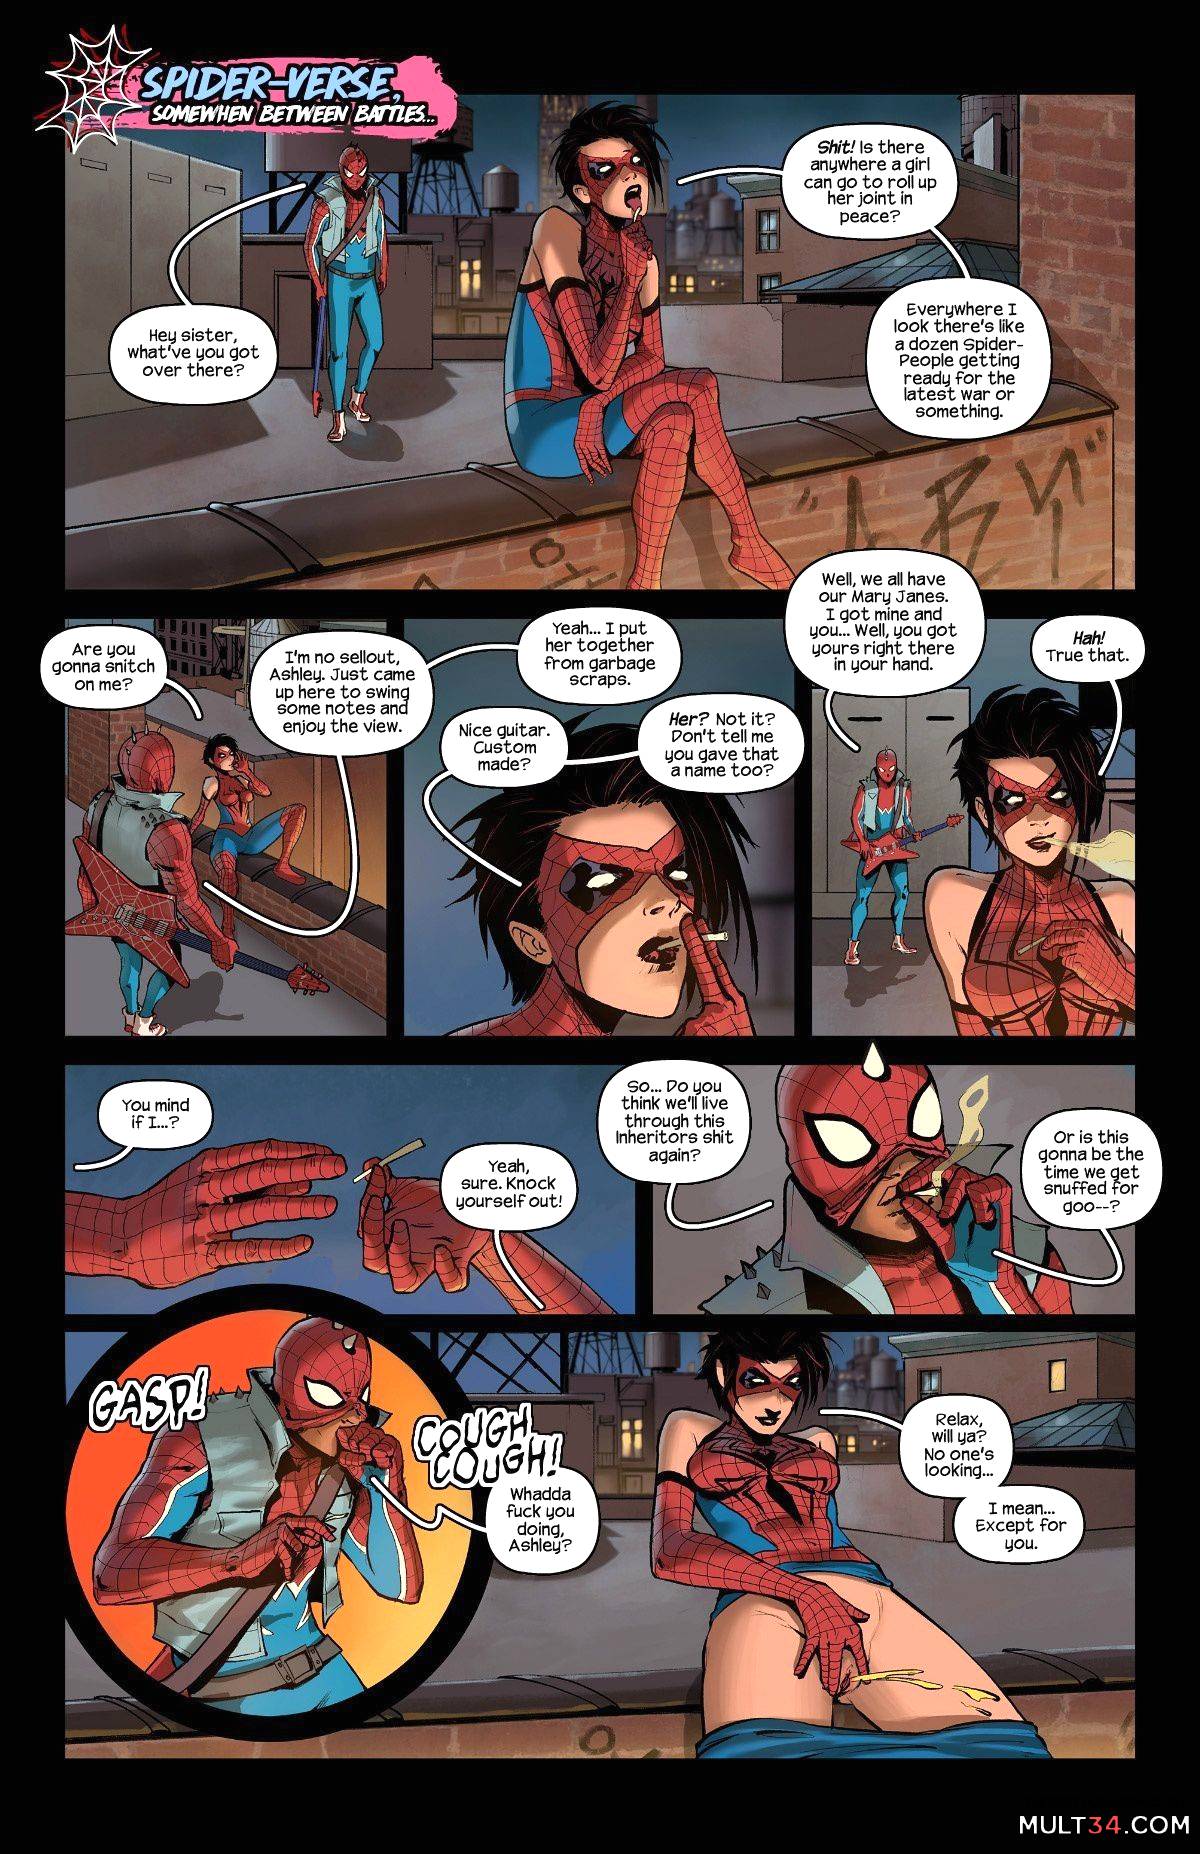 The Anarchic Spider-Fuckers page 3